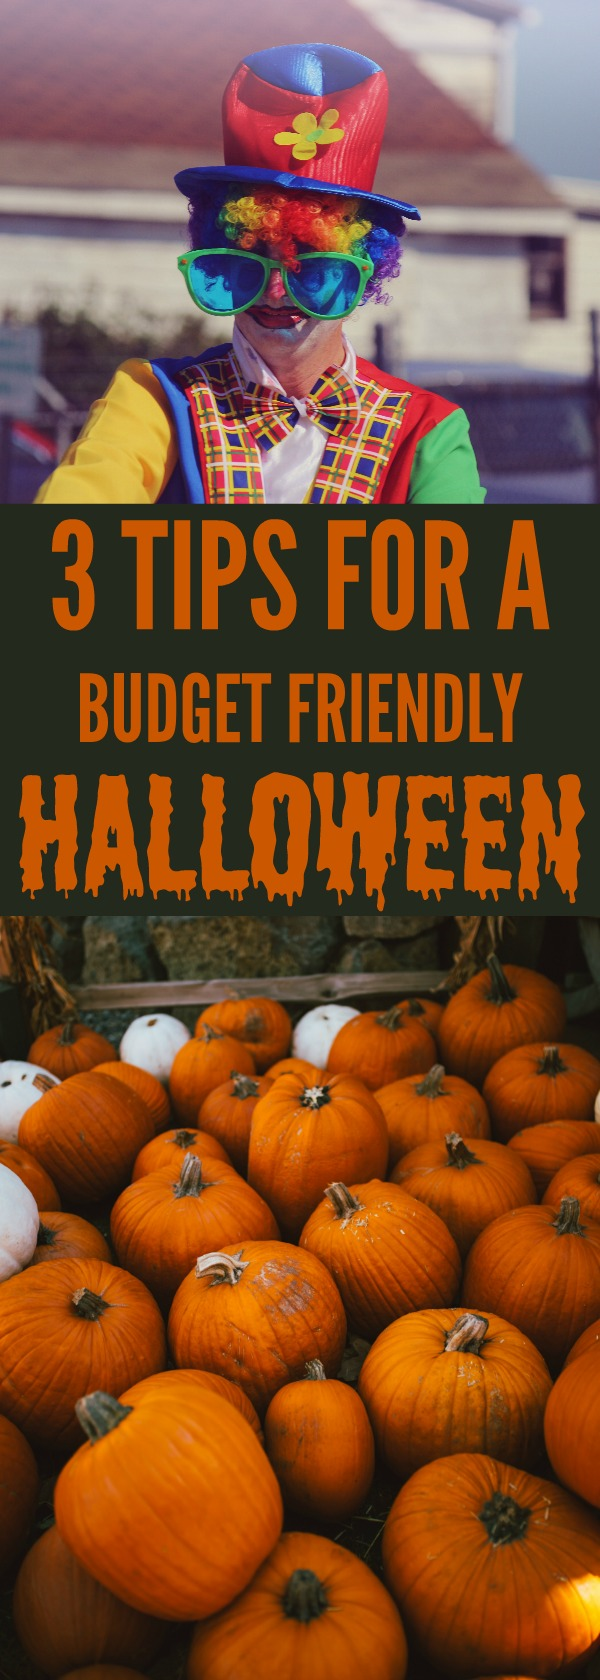 3 tips for a budget friendly halloween